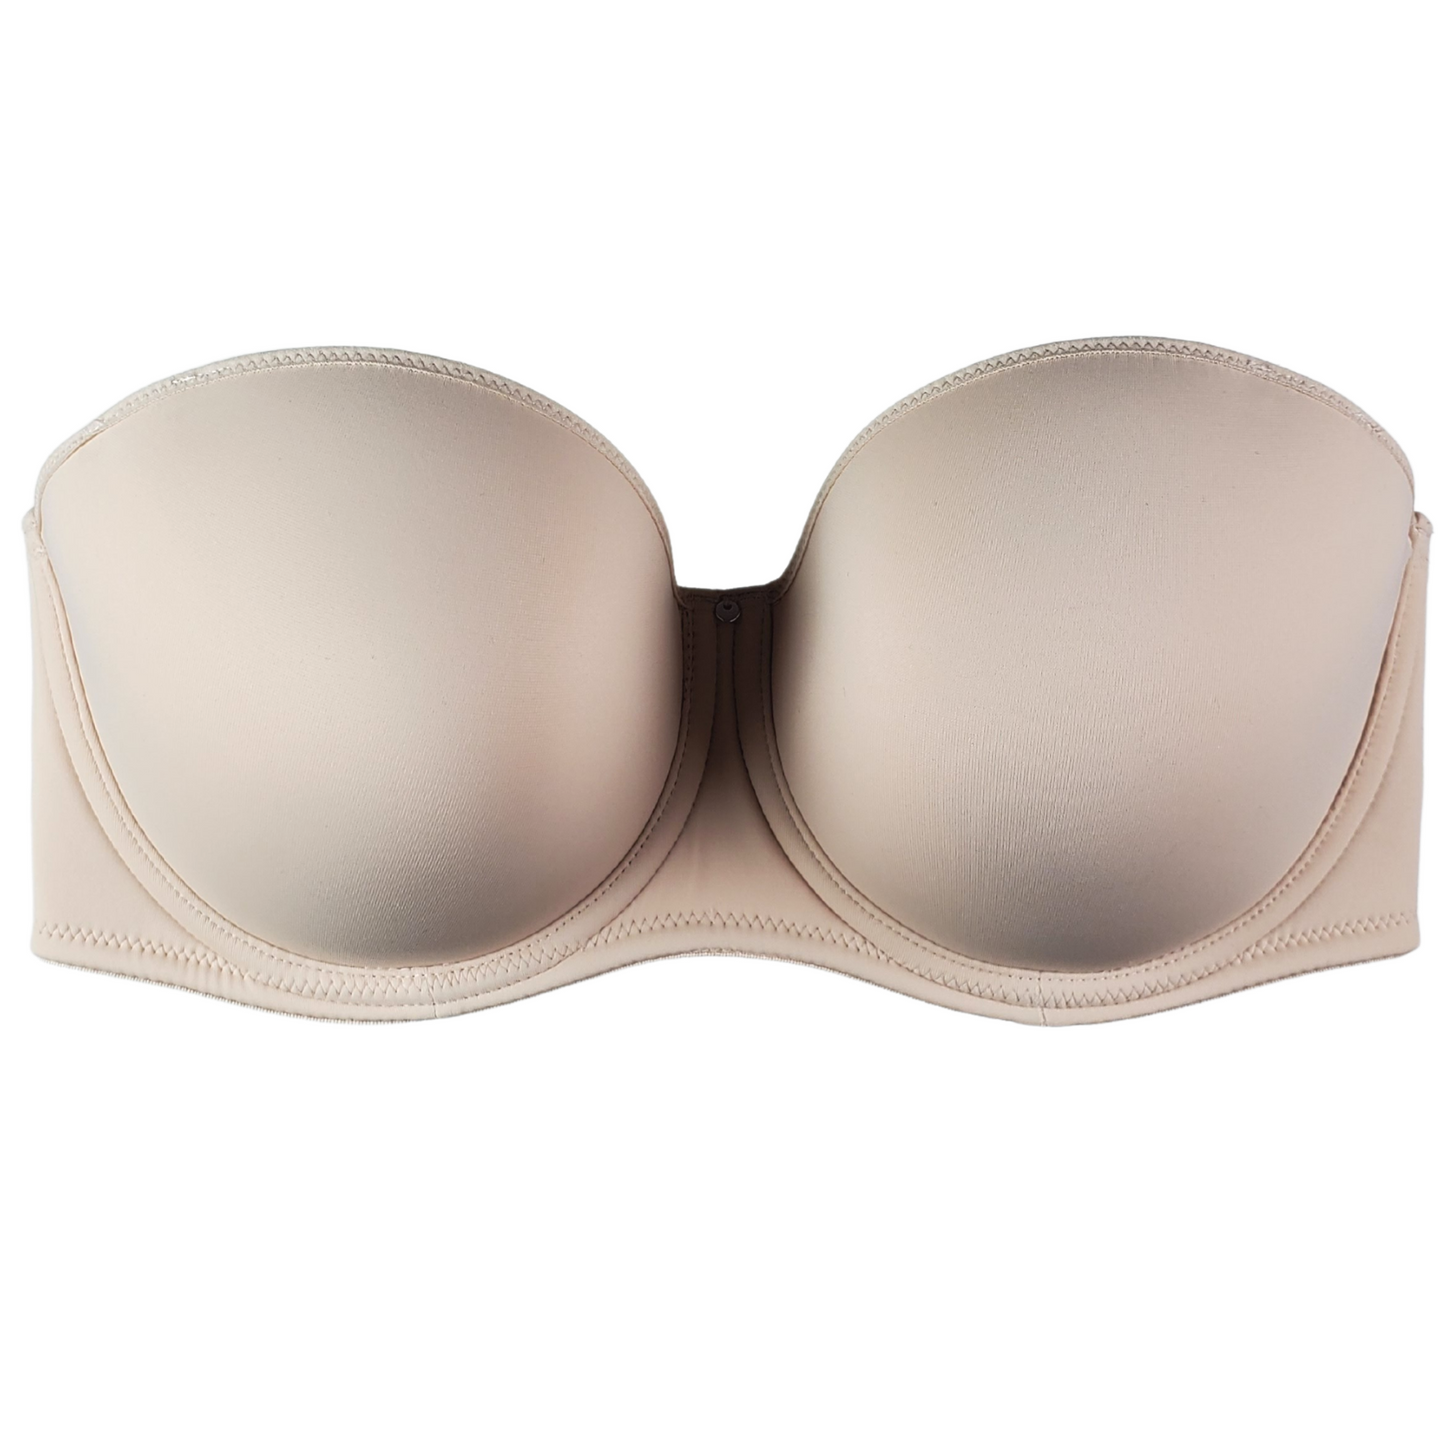 Fantasie Speciality Smooth Cup Bra - White, 34G for sale online